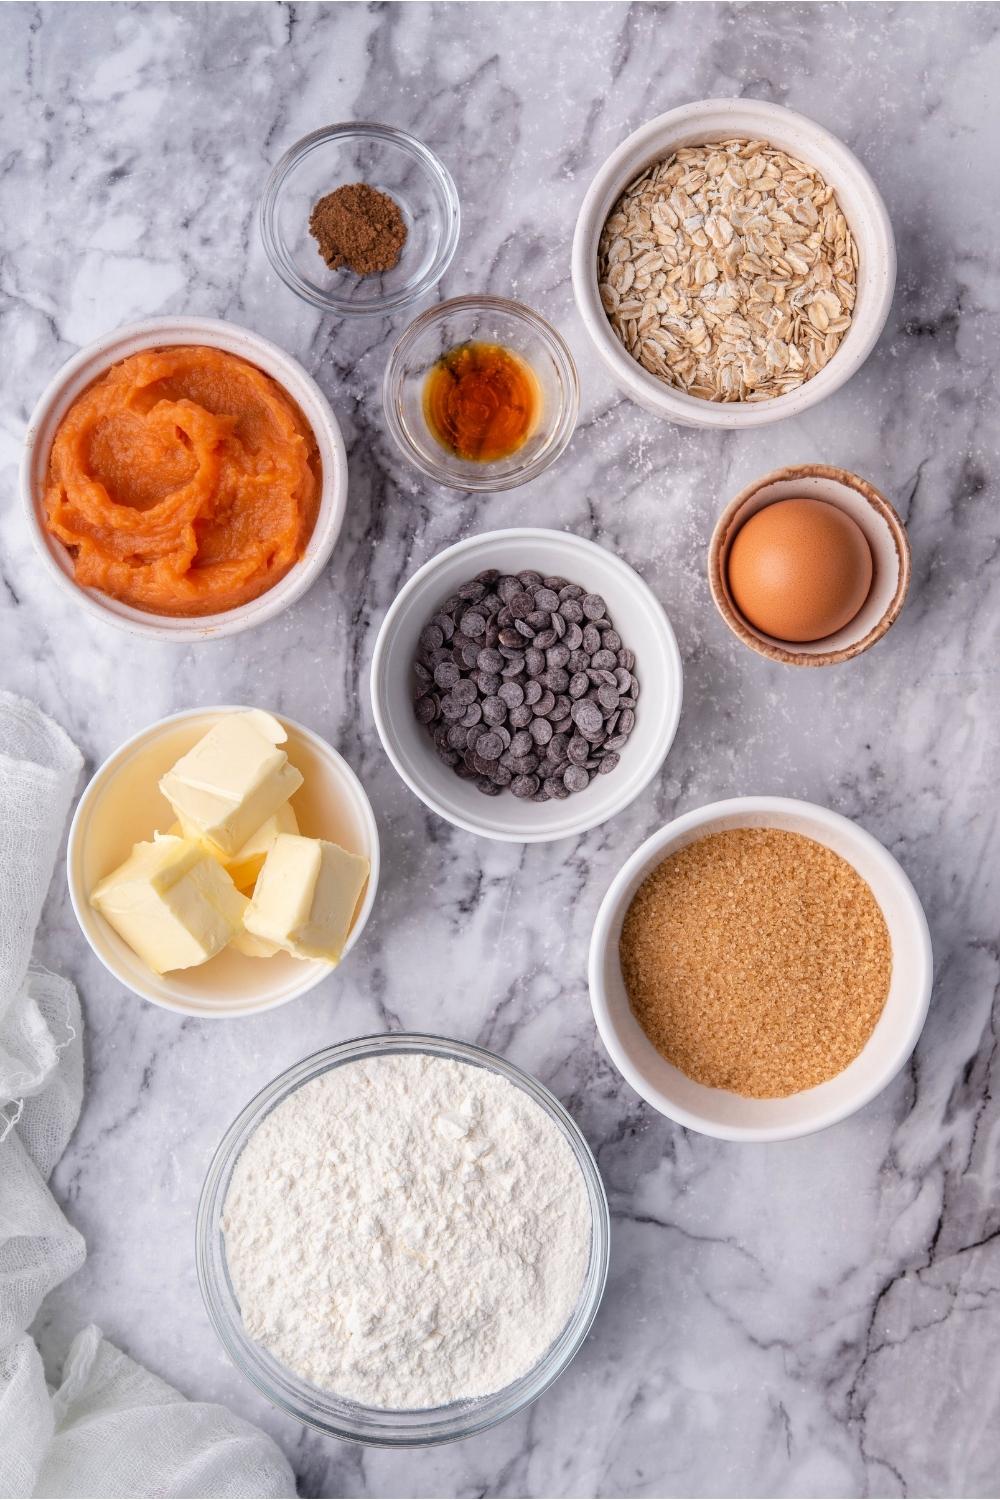 An assortment of ingredients for sweet potato cookies including bowls of sweet potato mash, butter, flour, chocolate chips, eggs, brown sugar, vanilla extract, and spices.